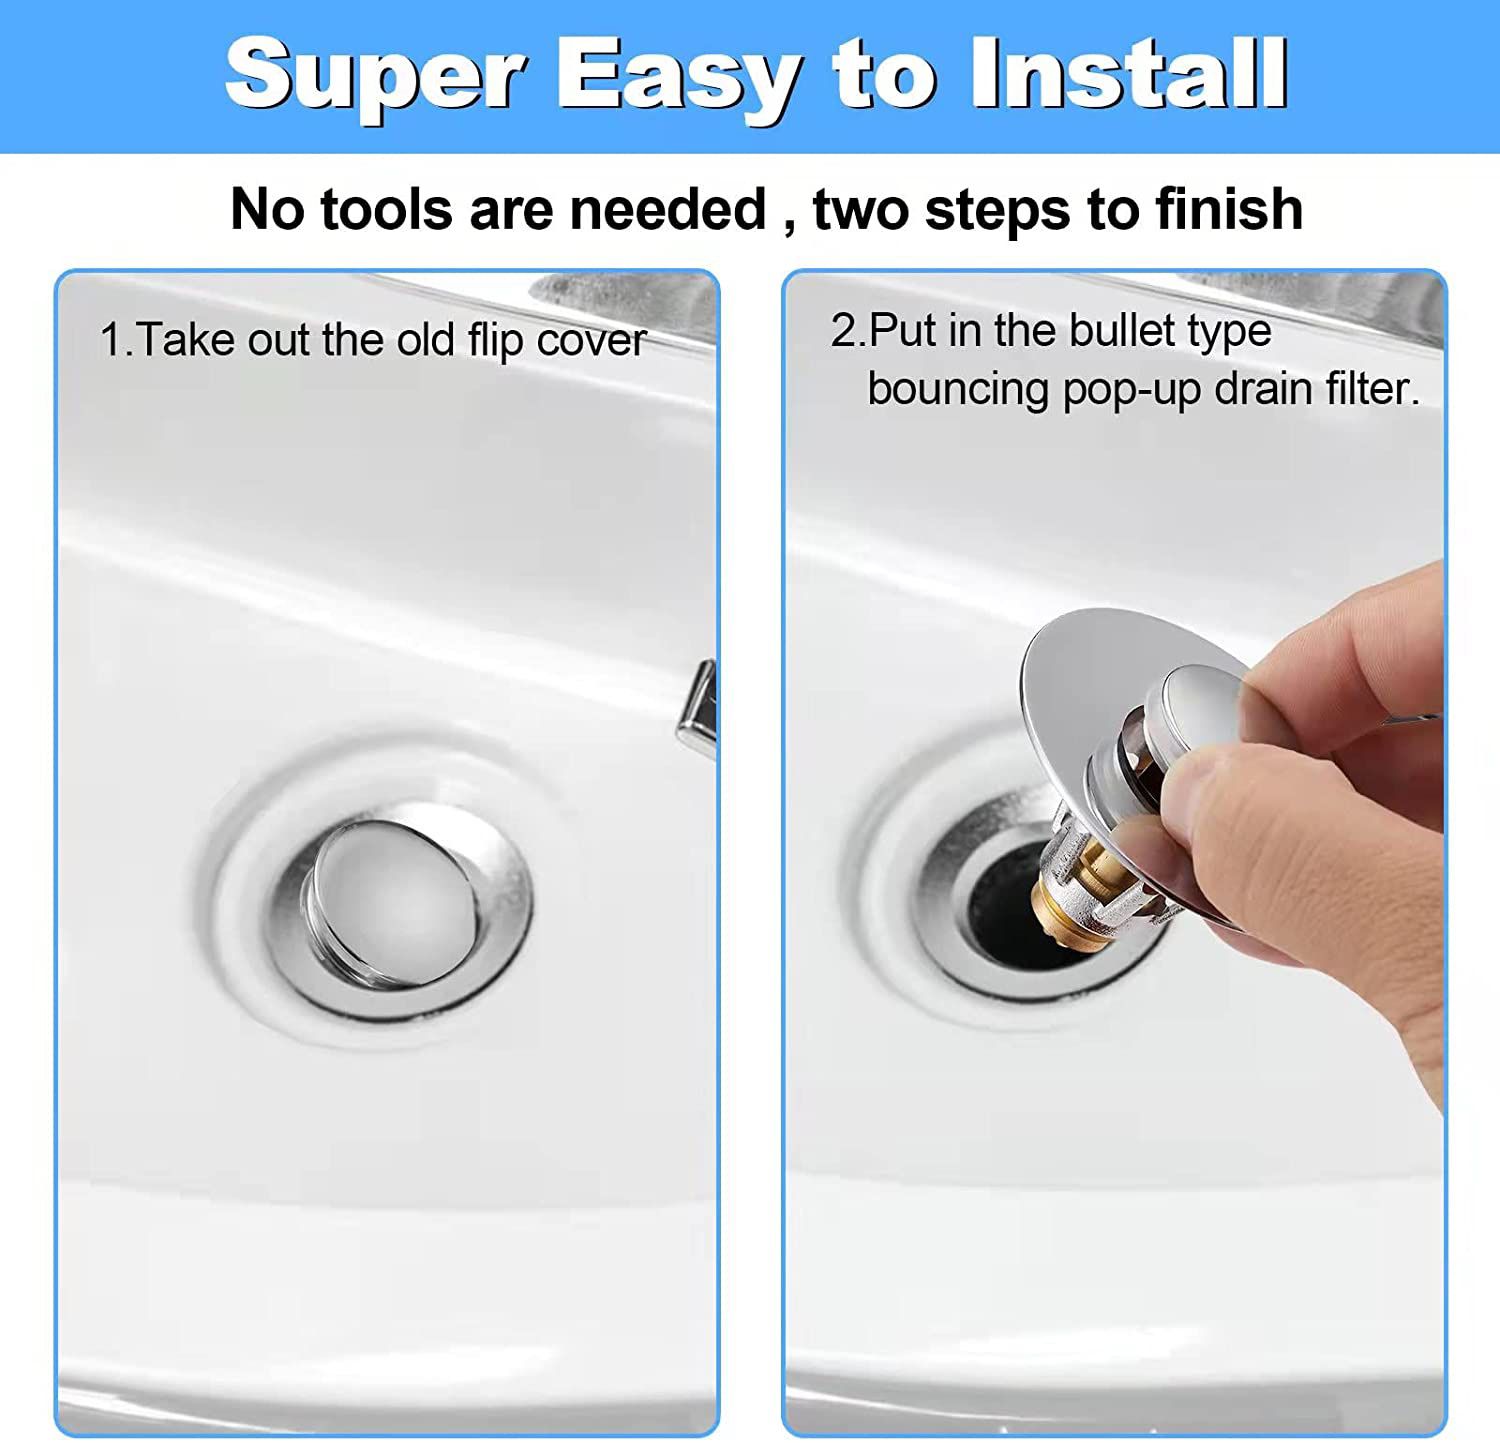 Bathroom Sink Stopper, Pop-Up Drain Filter, for 1.08-1.34 in U.S. Standard Drain Holes, Anti Clogging Sink Strainer with Basket, Bounce Bullet Core Ty